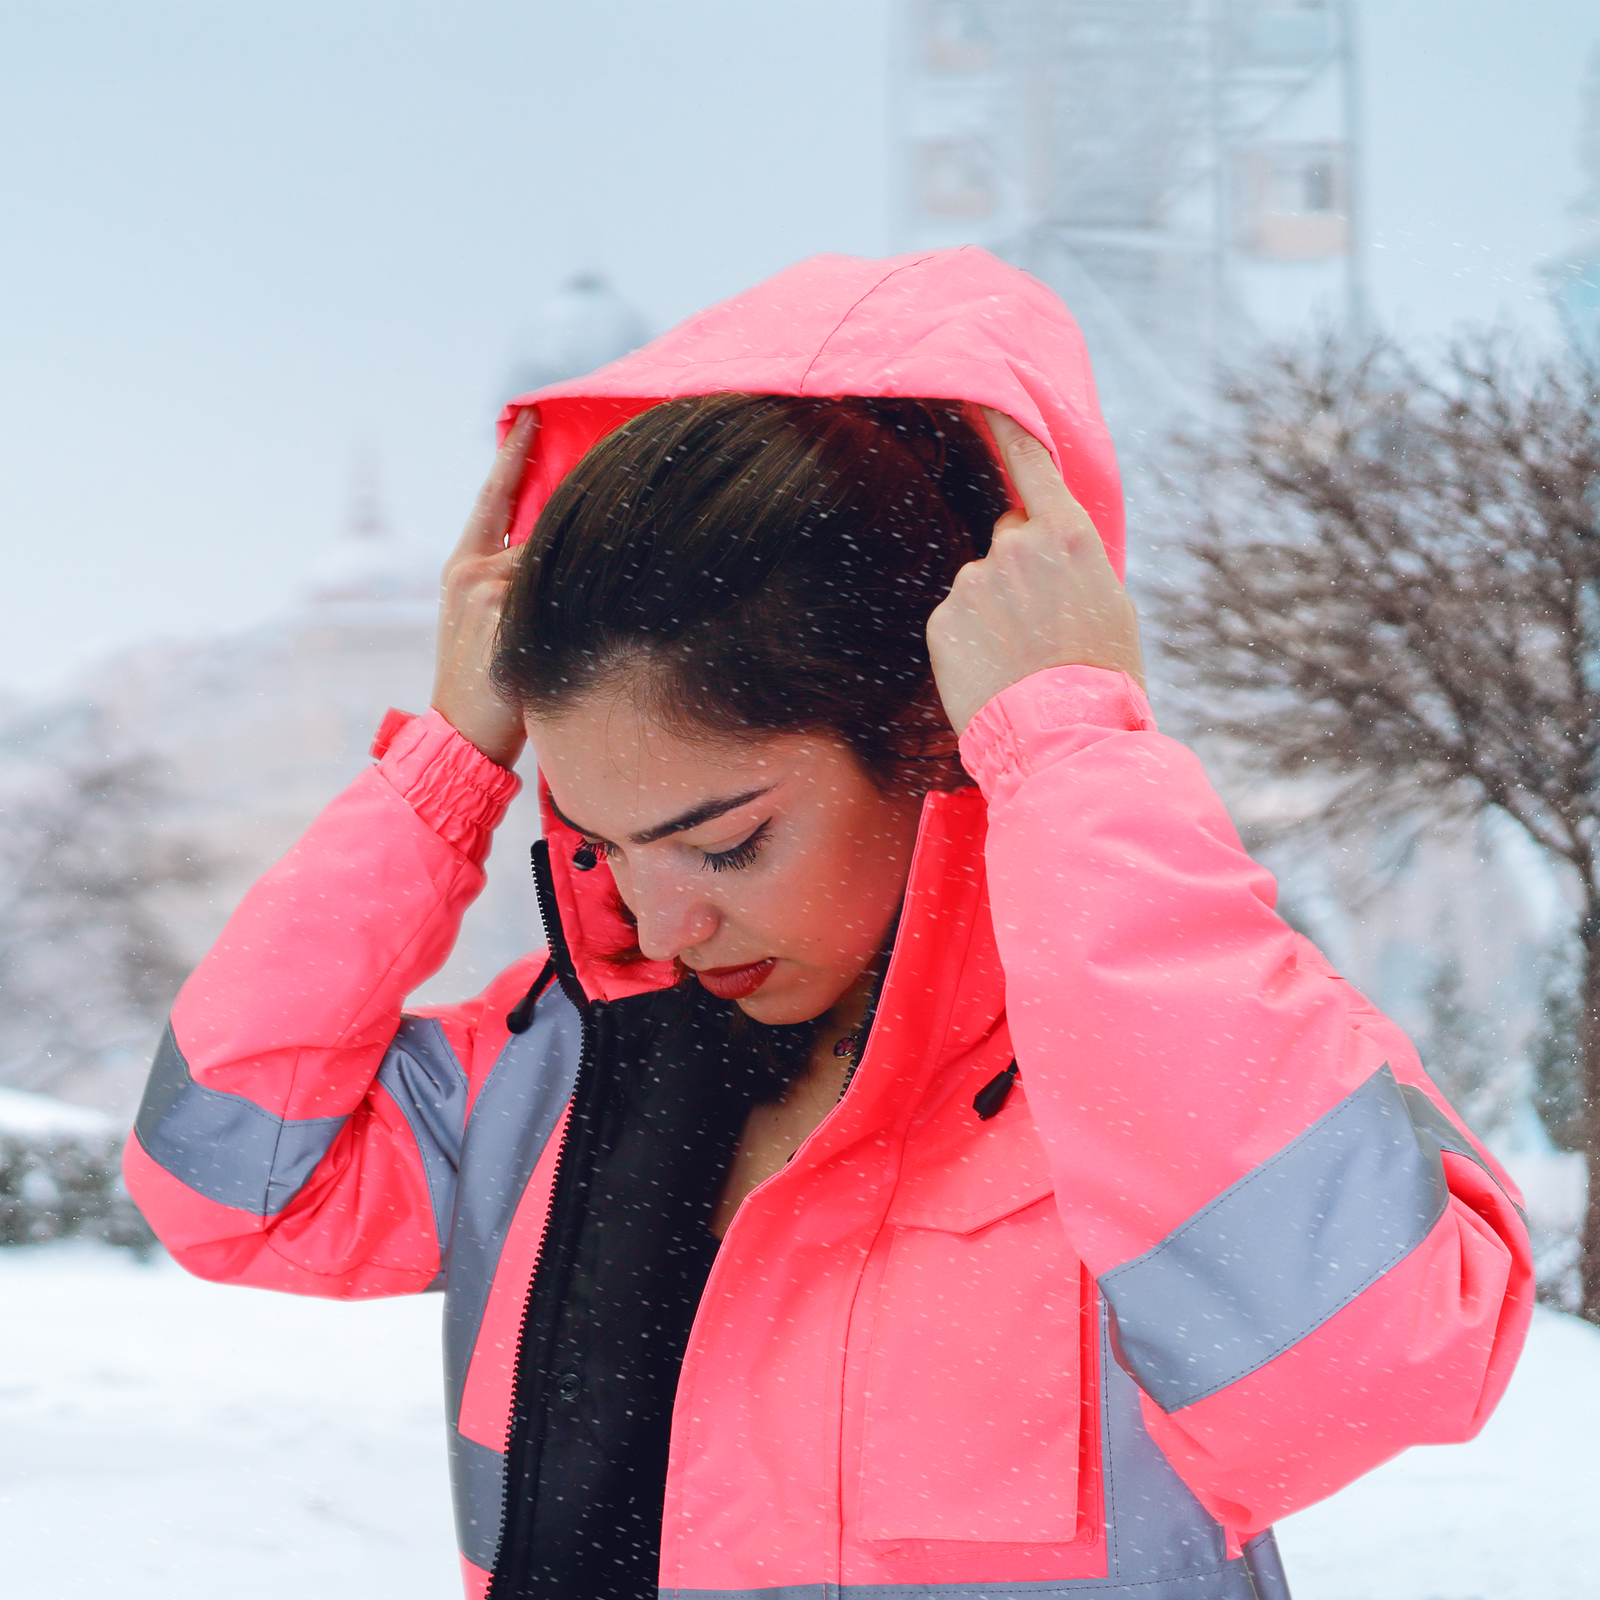 Woman in the snow wearing the hi-vis safety jacket in pink with reflective strips 